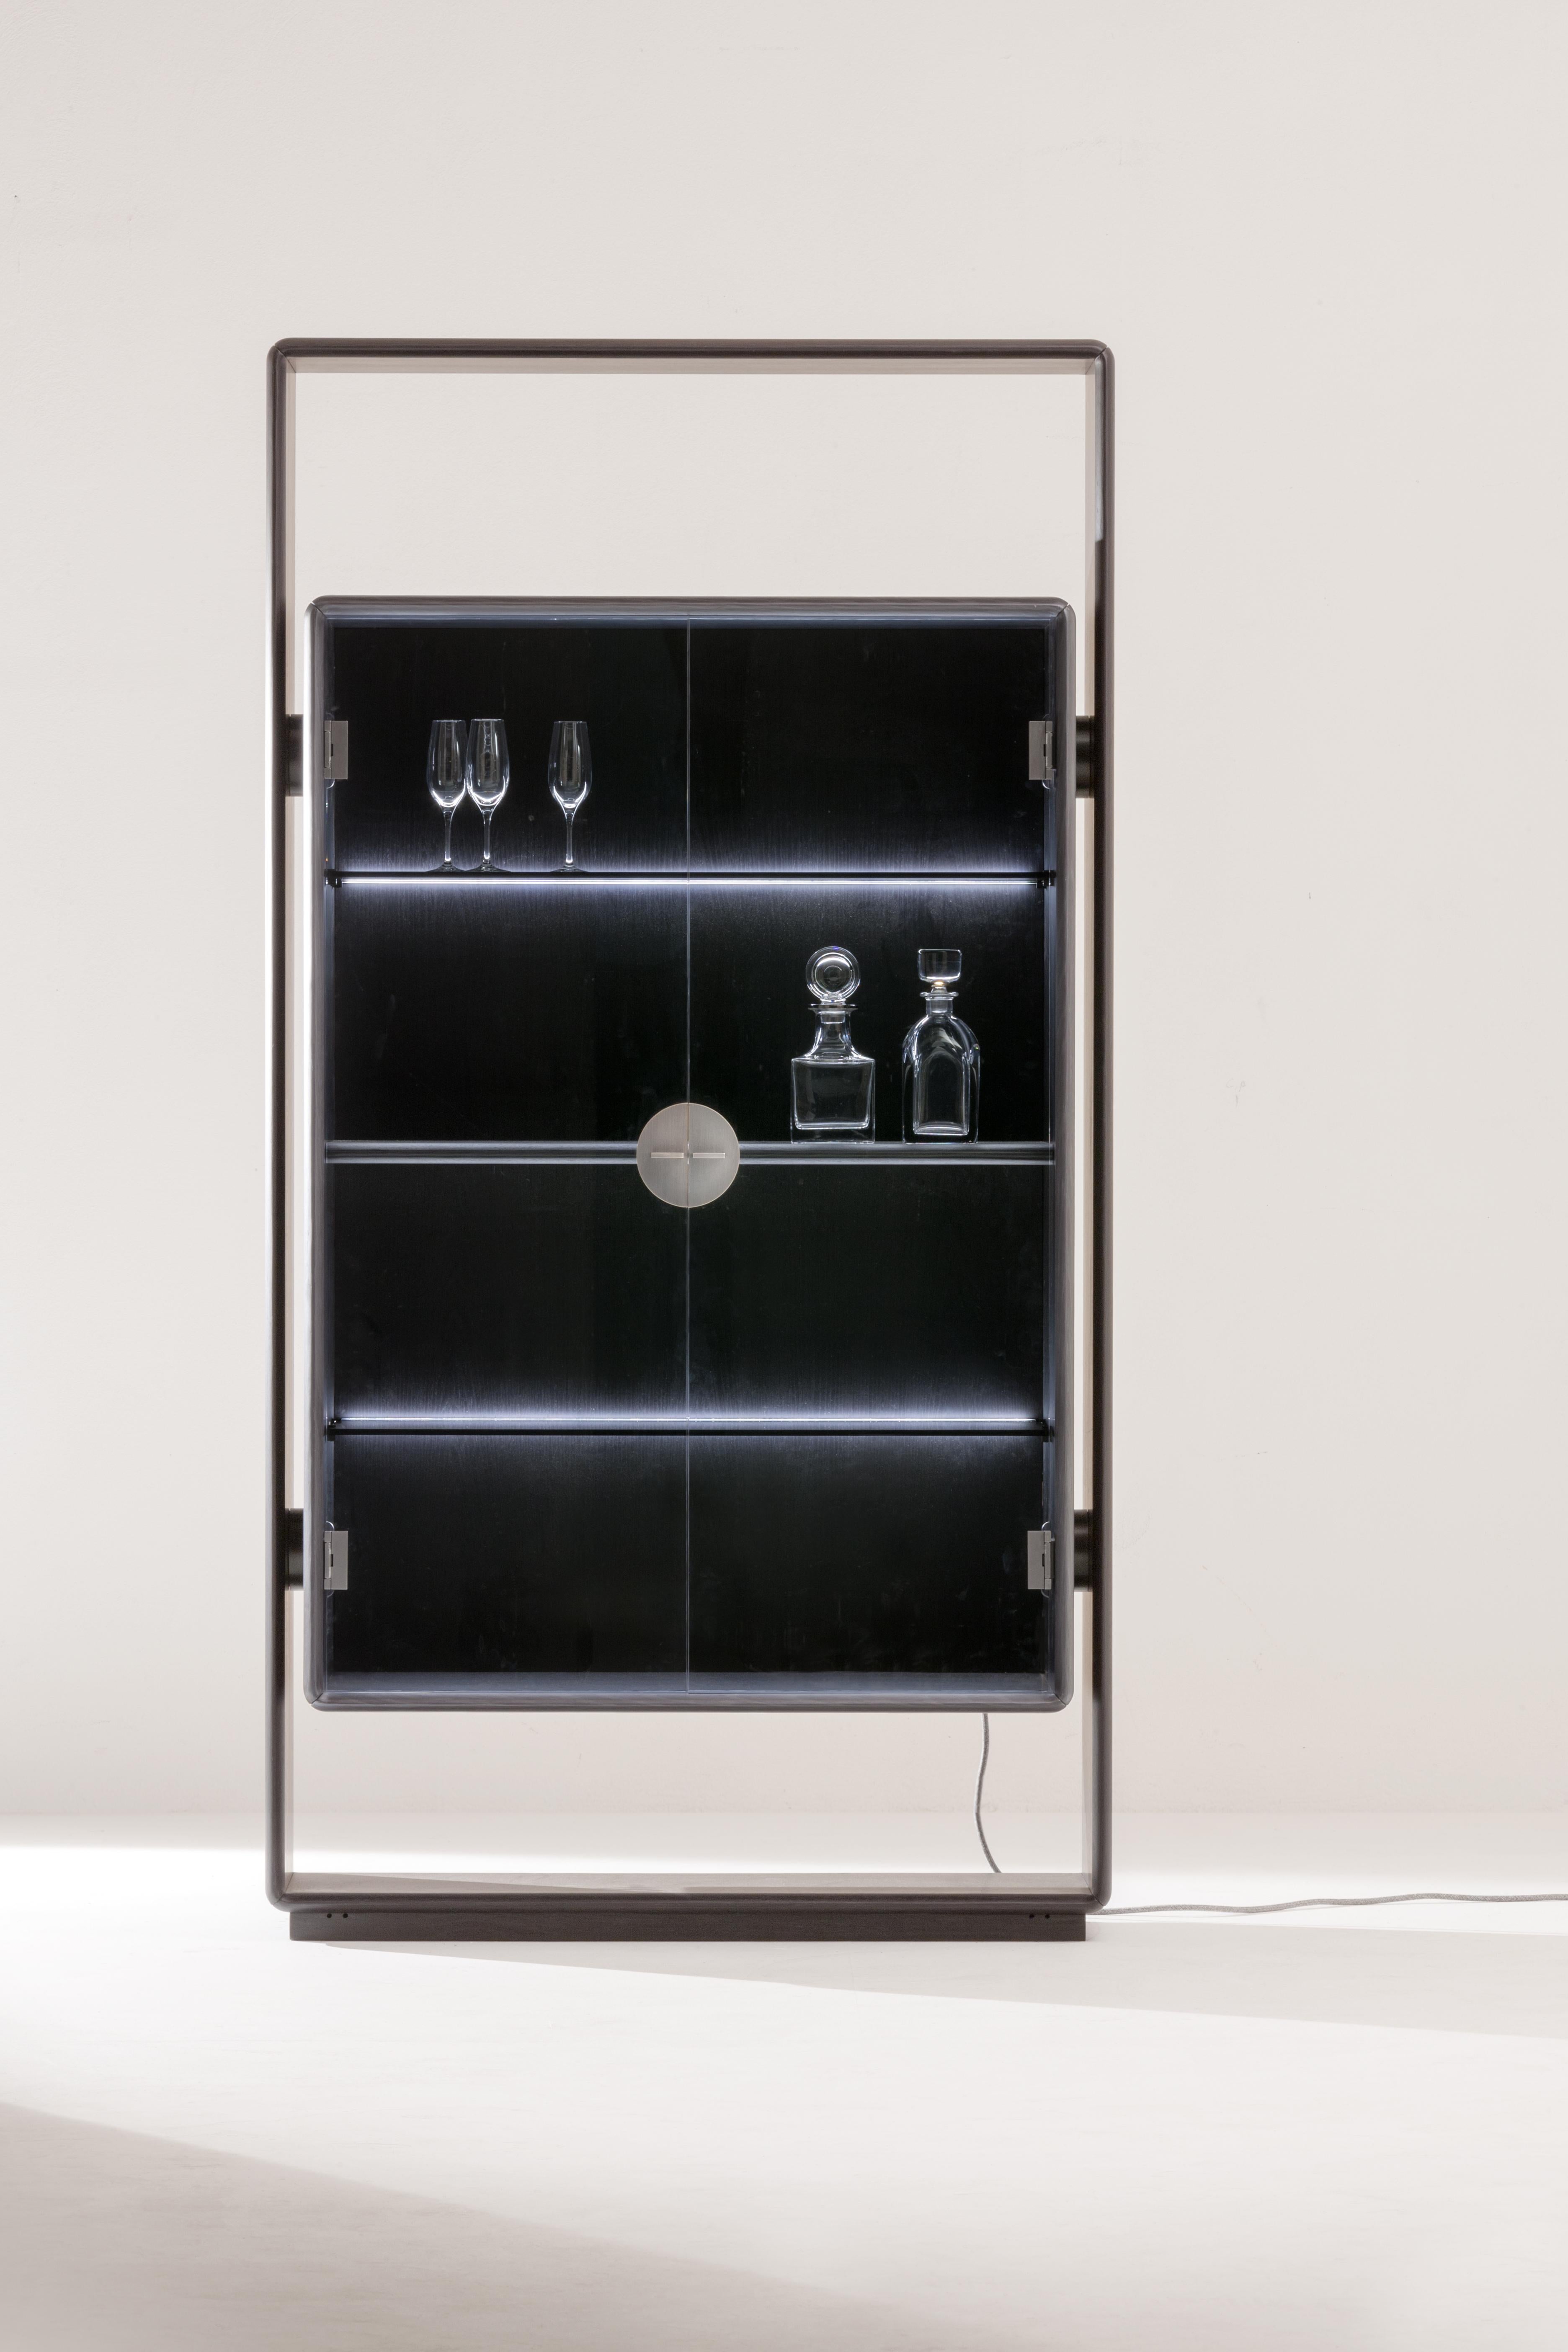 Tall storage unit with 2 hinged doors. Internally equipped with 2 glass shelves with LED lighting and 1 wooden shelf. Structure in black-dyed wood, doors in glass. Handle in burnished brass. Container and interiors in dyed wood Black AL1853.
2019